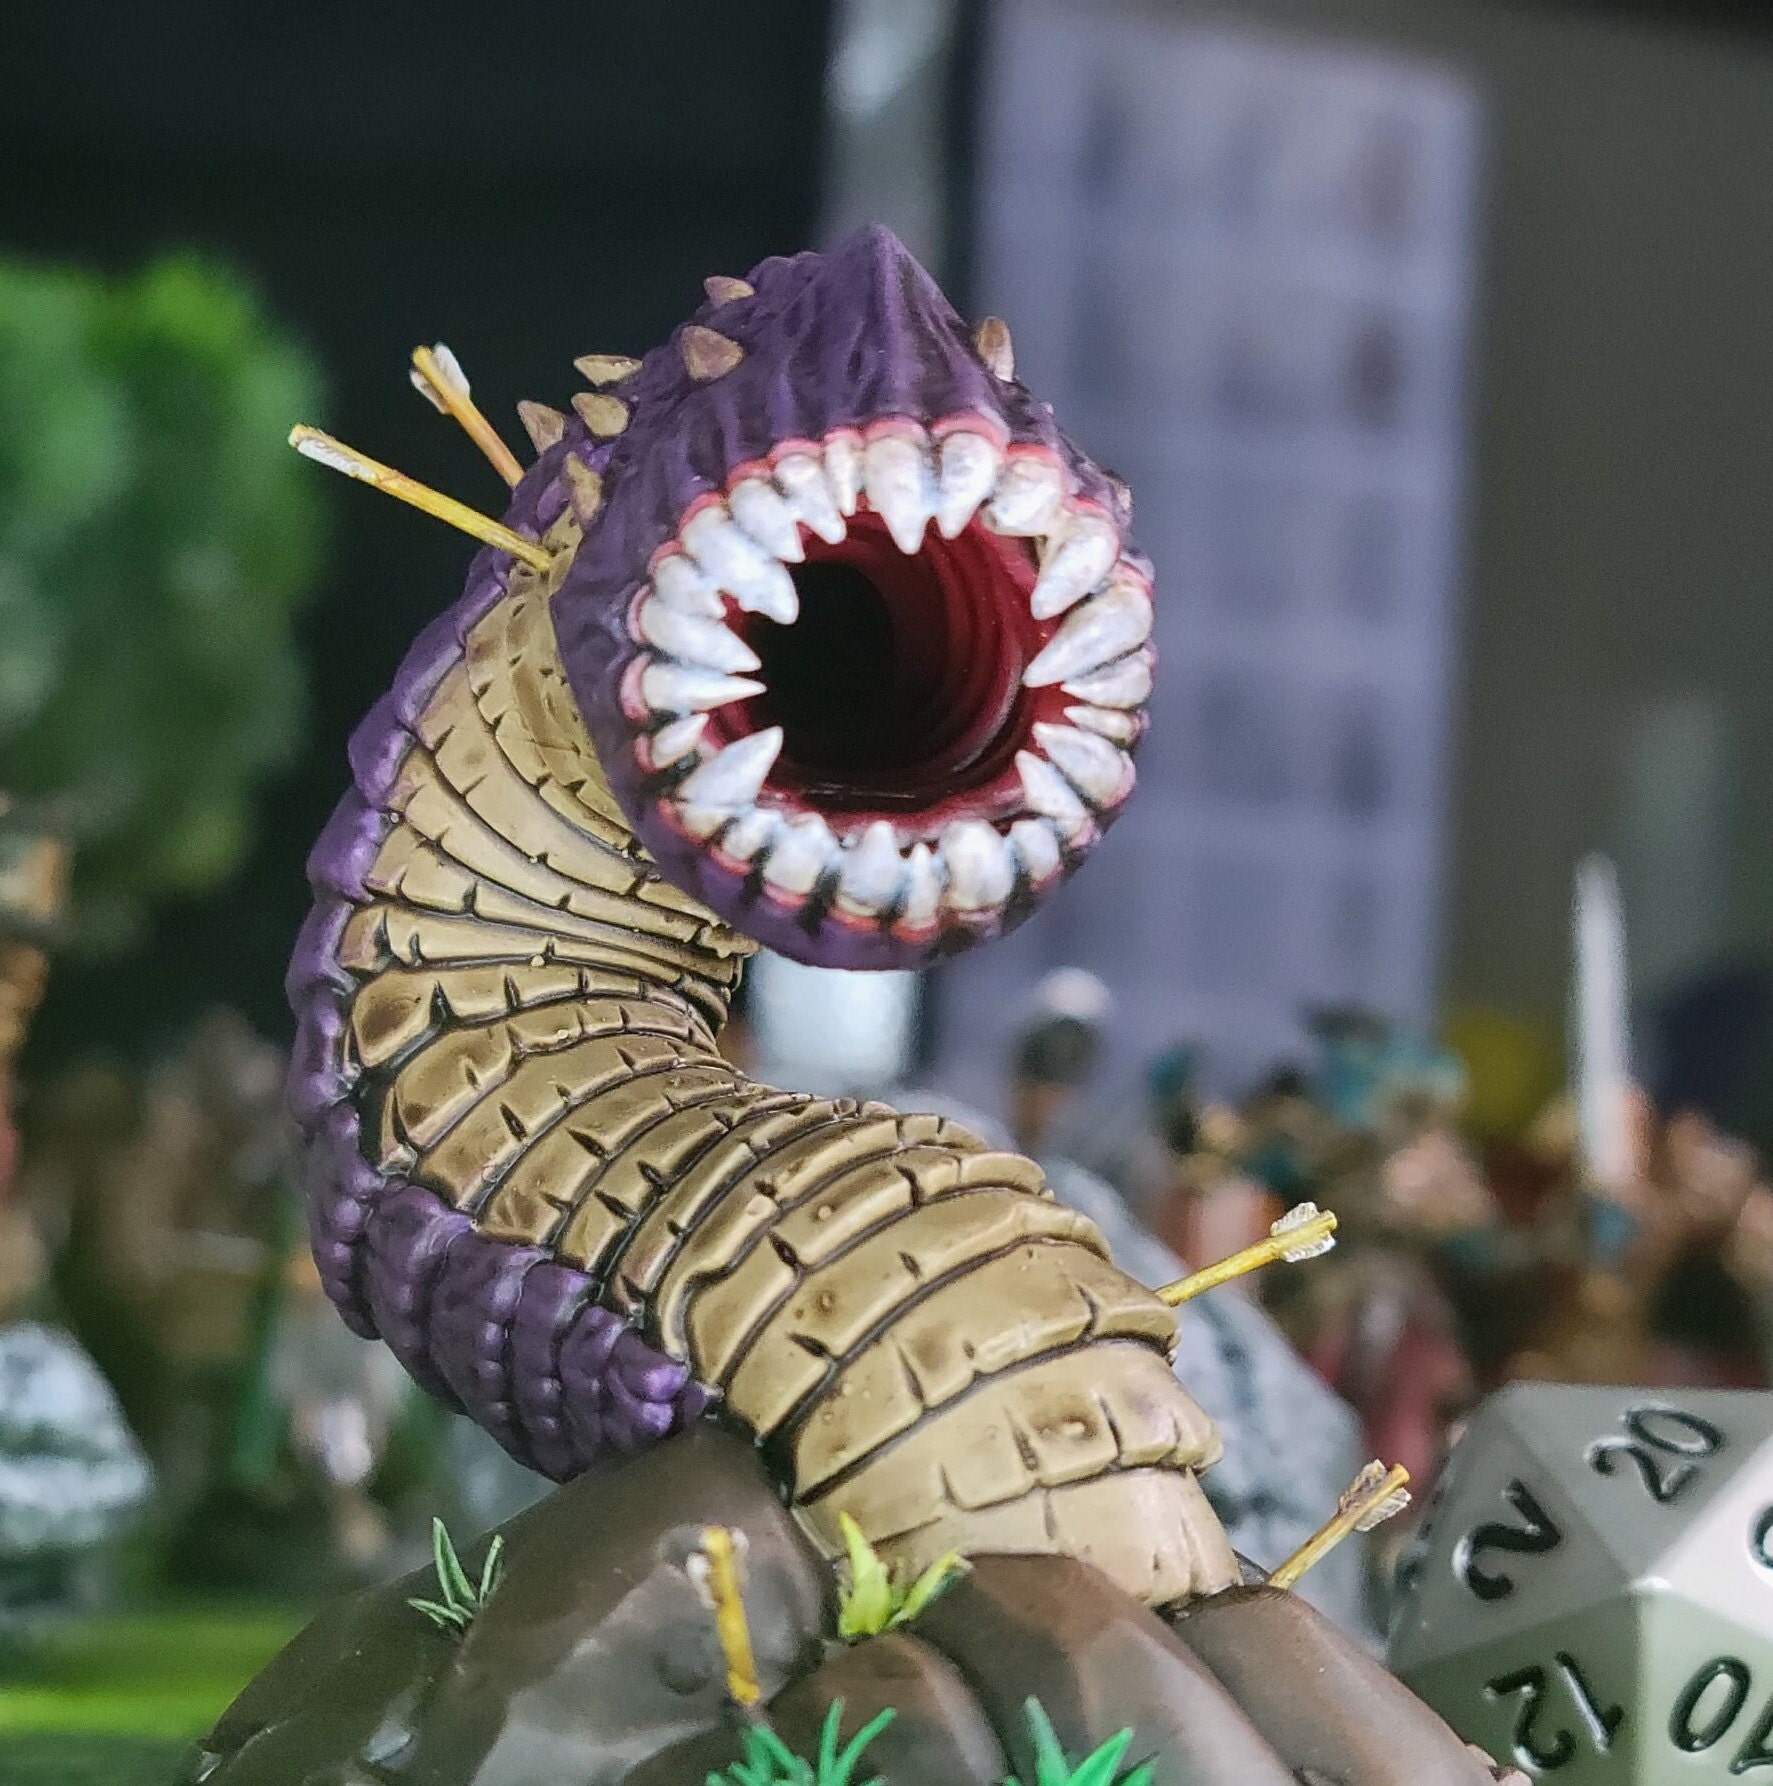 Purple Worm Monster DnD Fantasy Tabletop Roleplaying RPG 3D Printed Resin  Model